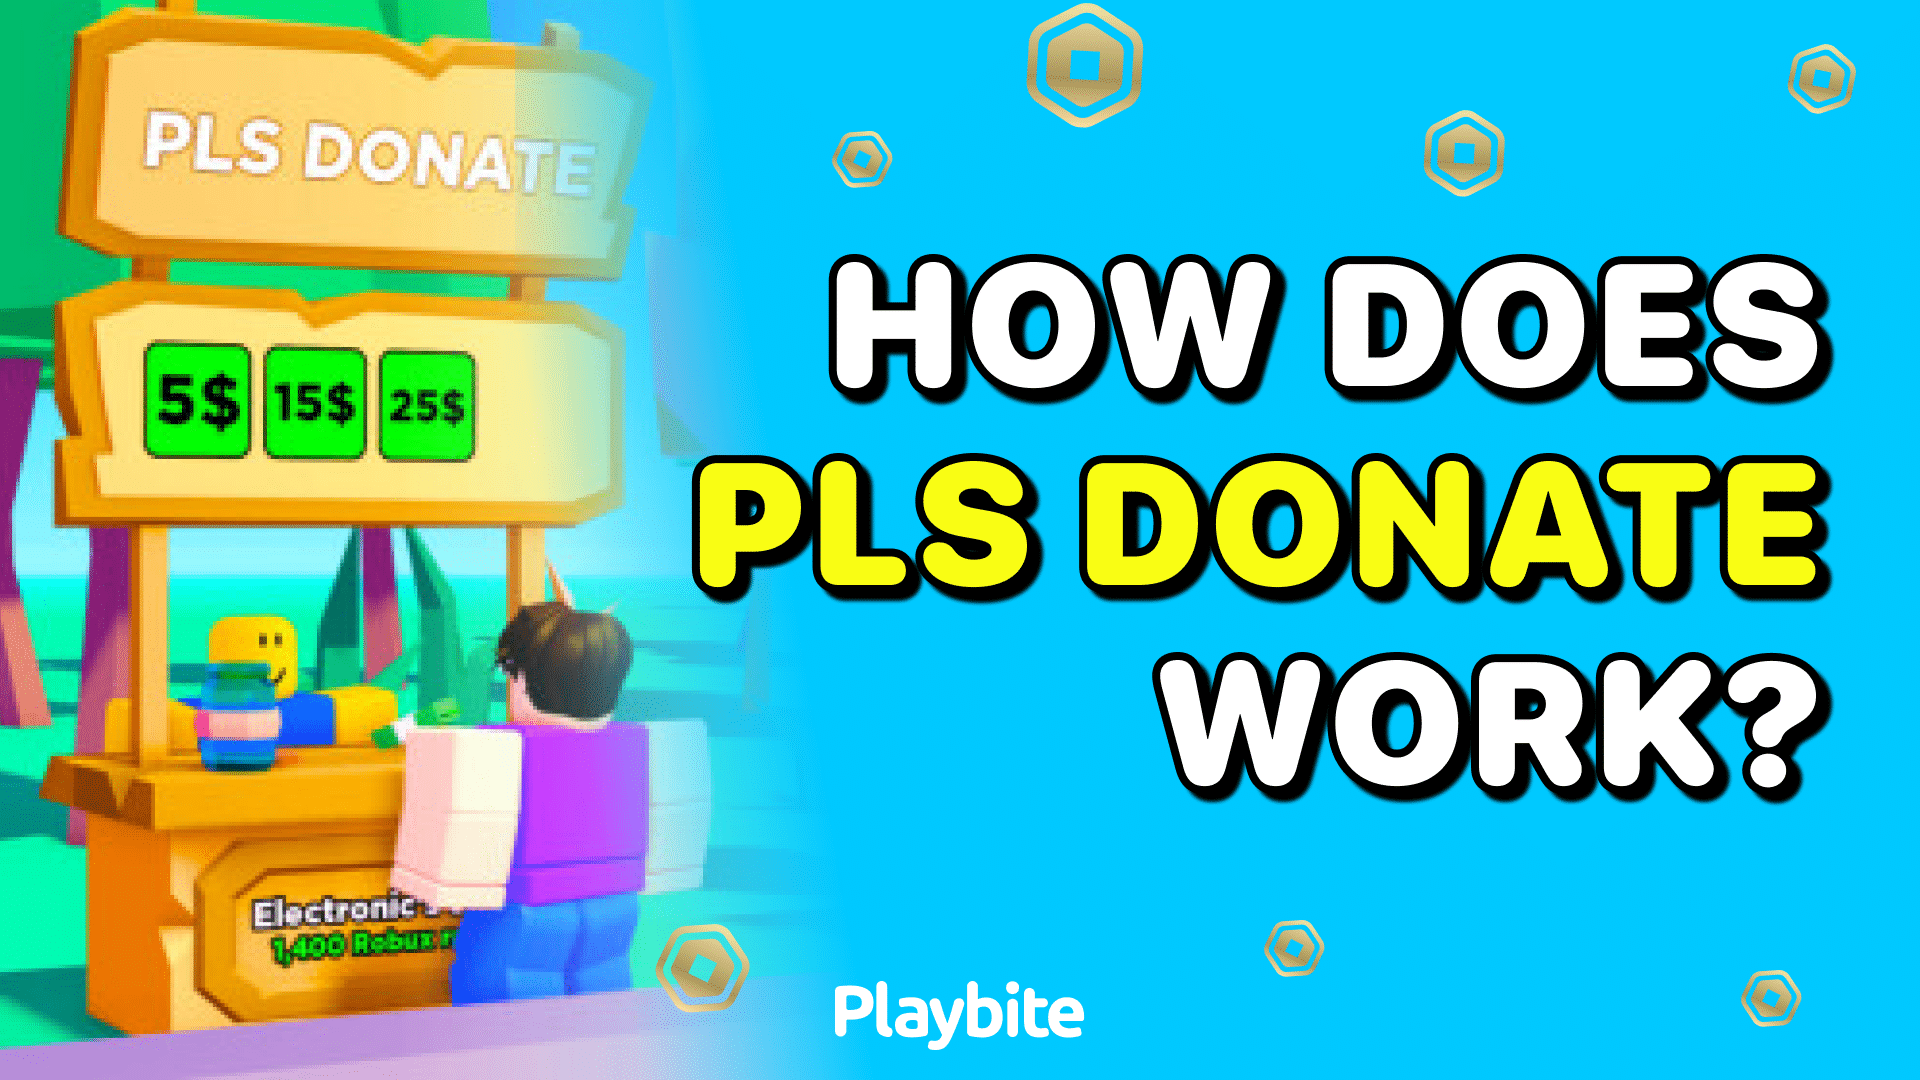 How Does PLS DONATE Work?